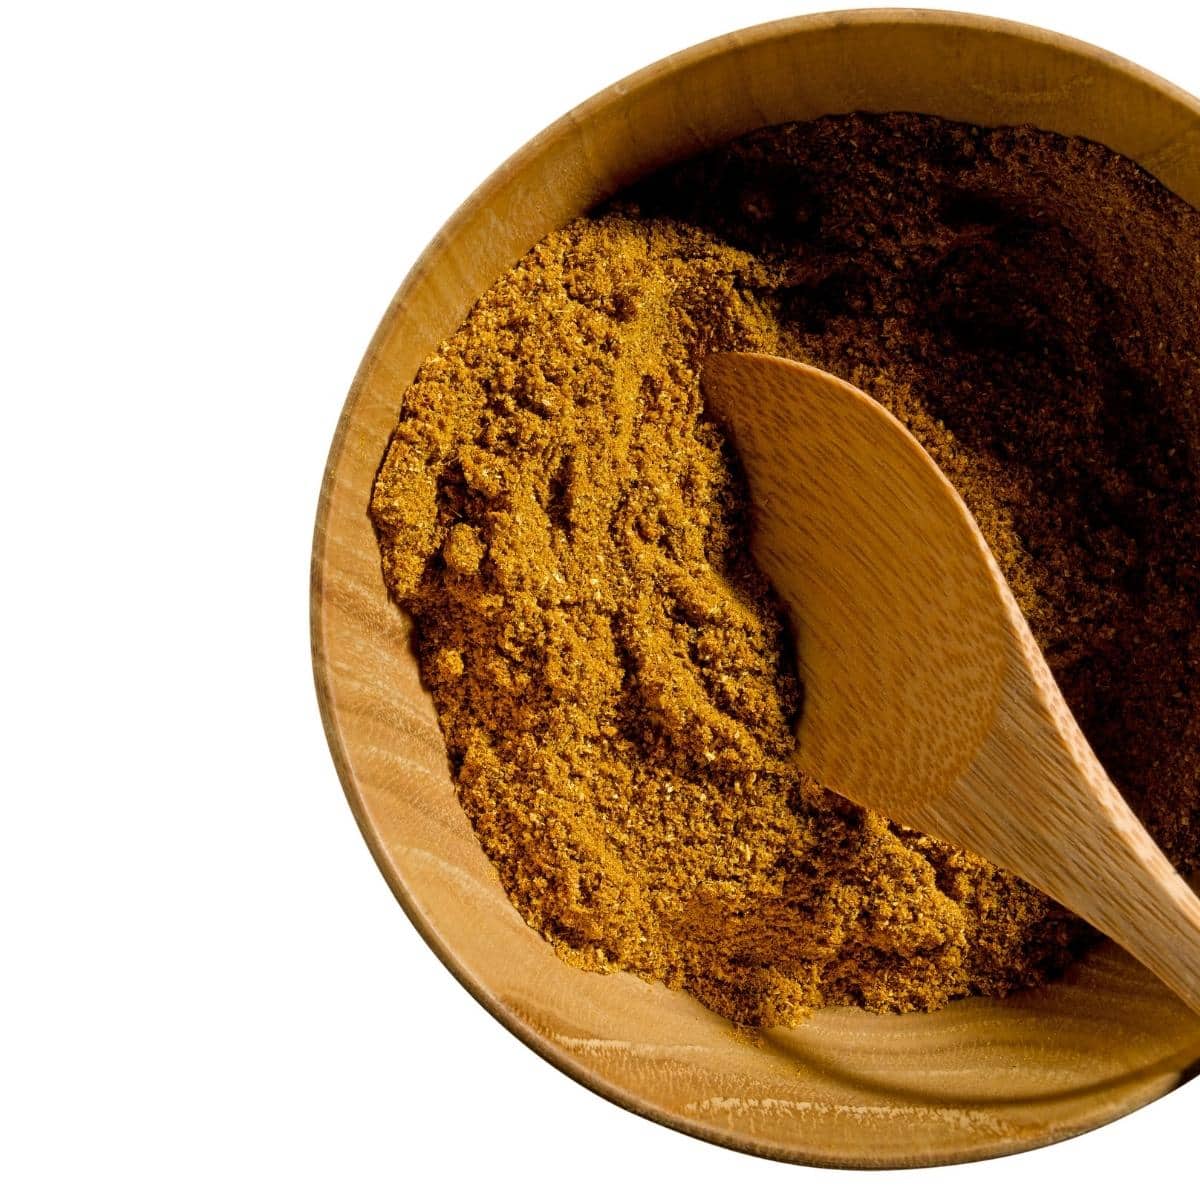 A small wooden bowl filled with garam masala and a wooden spoon.